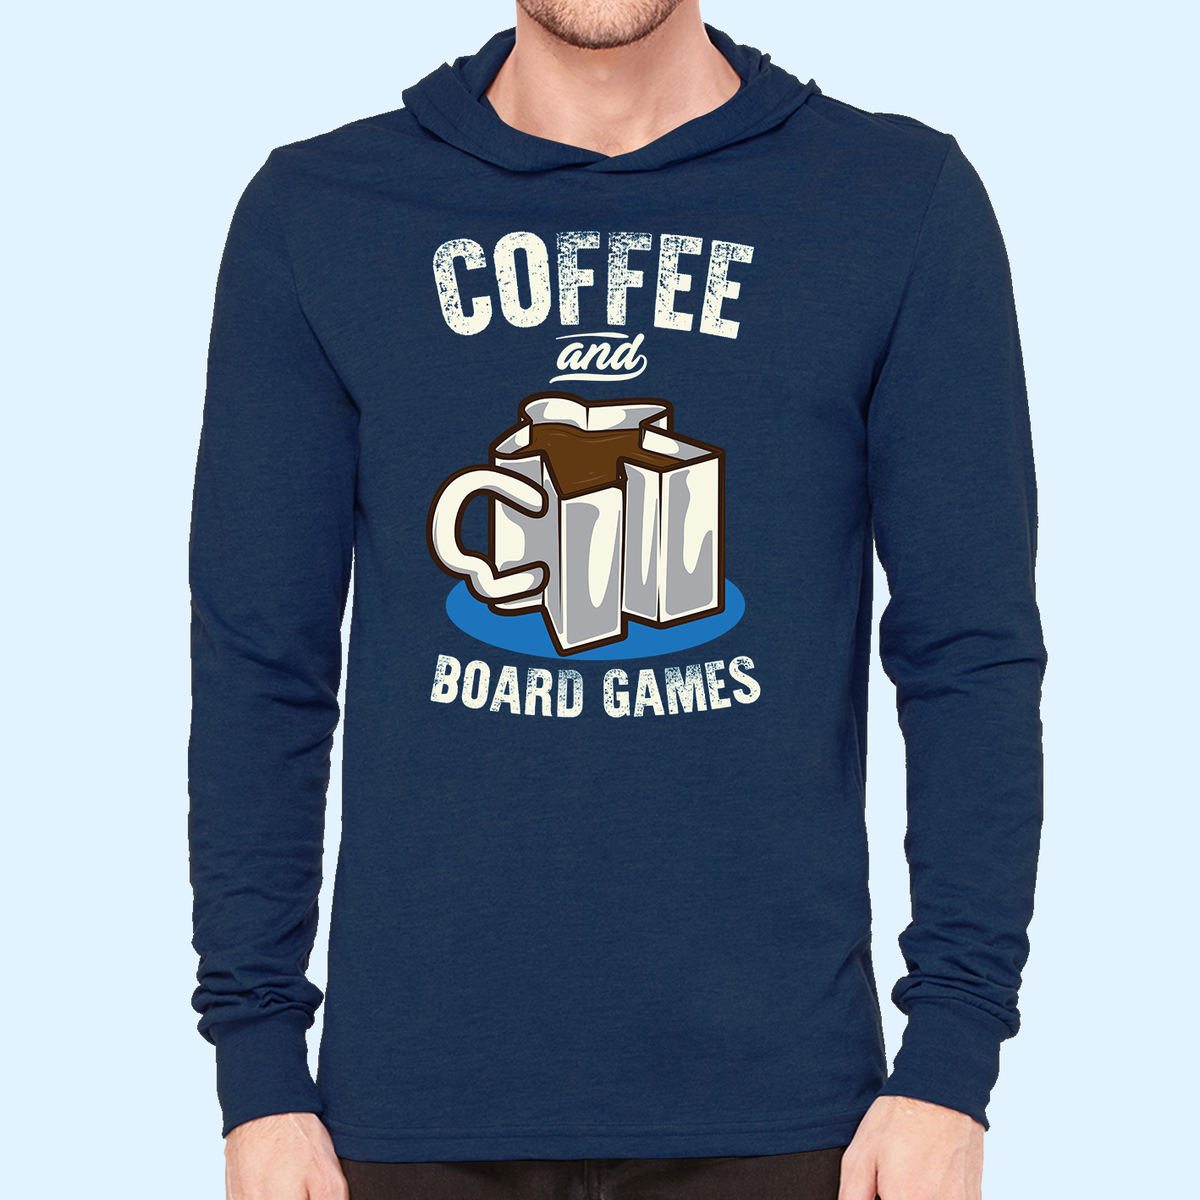 Coffee and Board Games Hooded Longsleeve T-Shirt